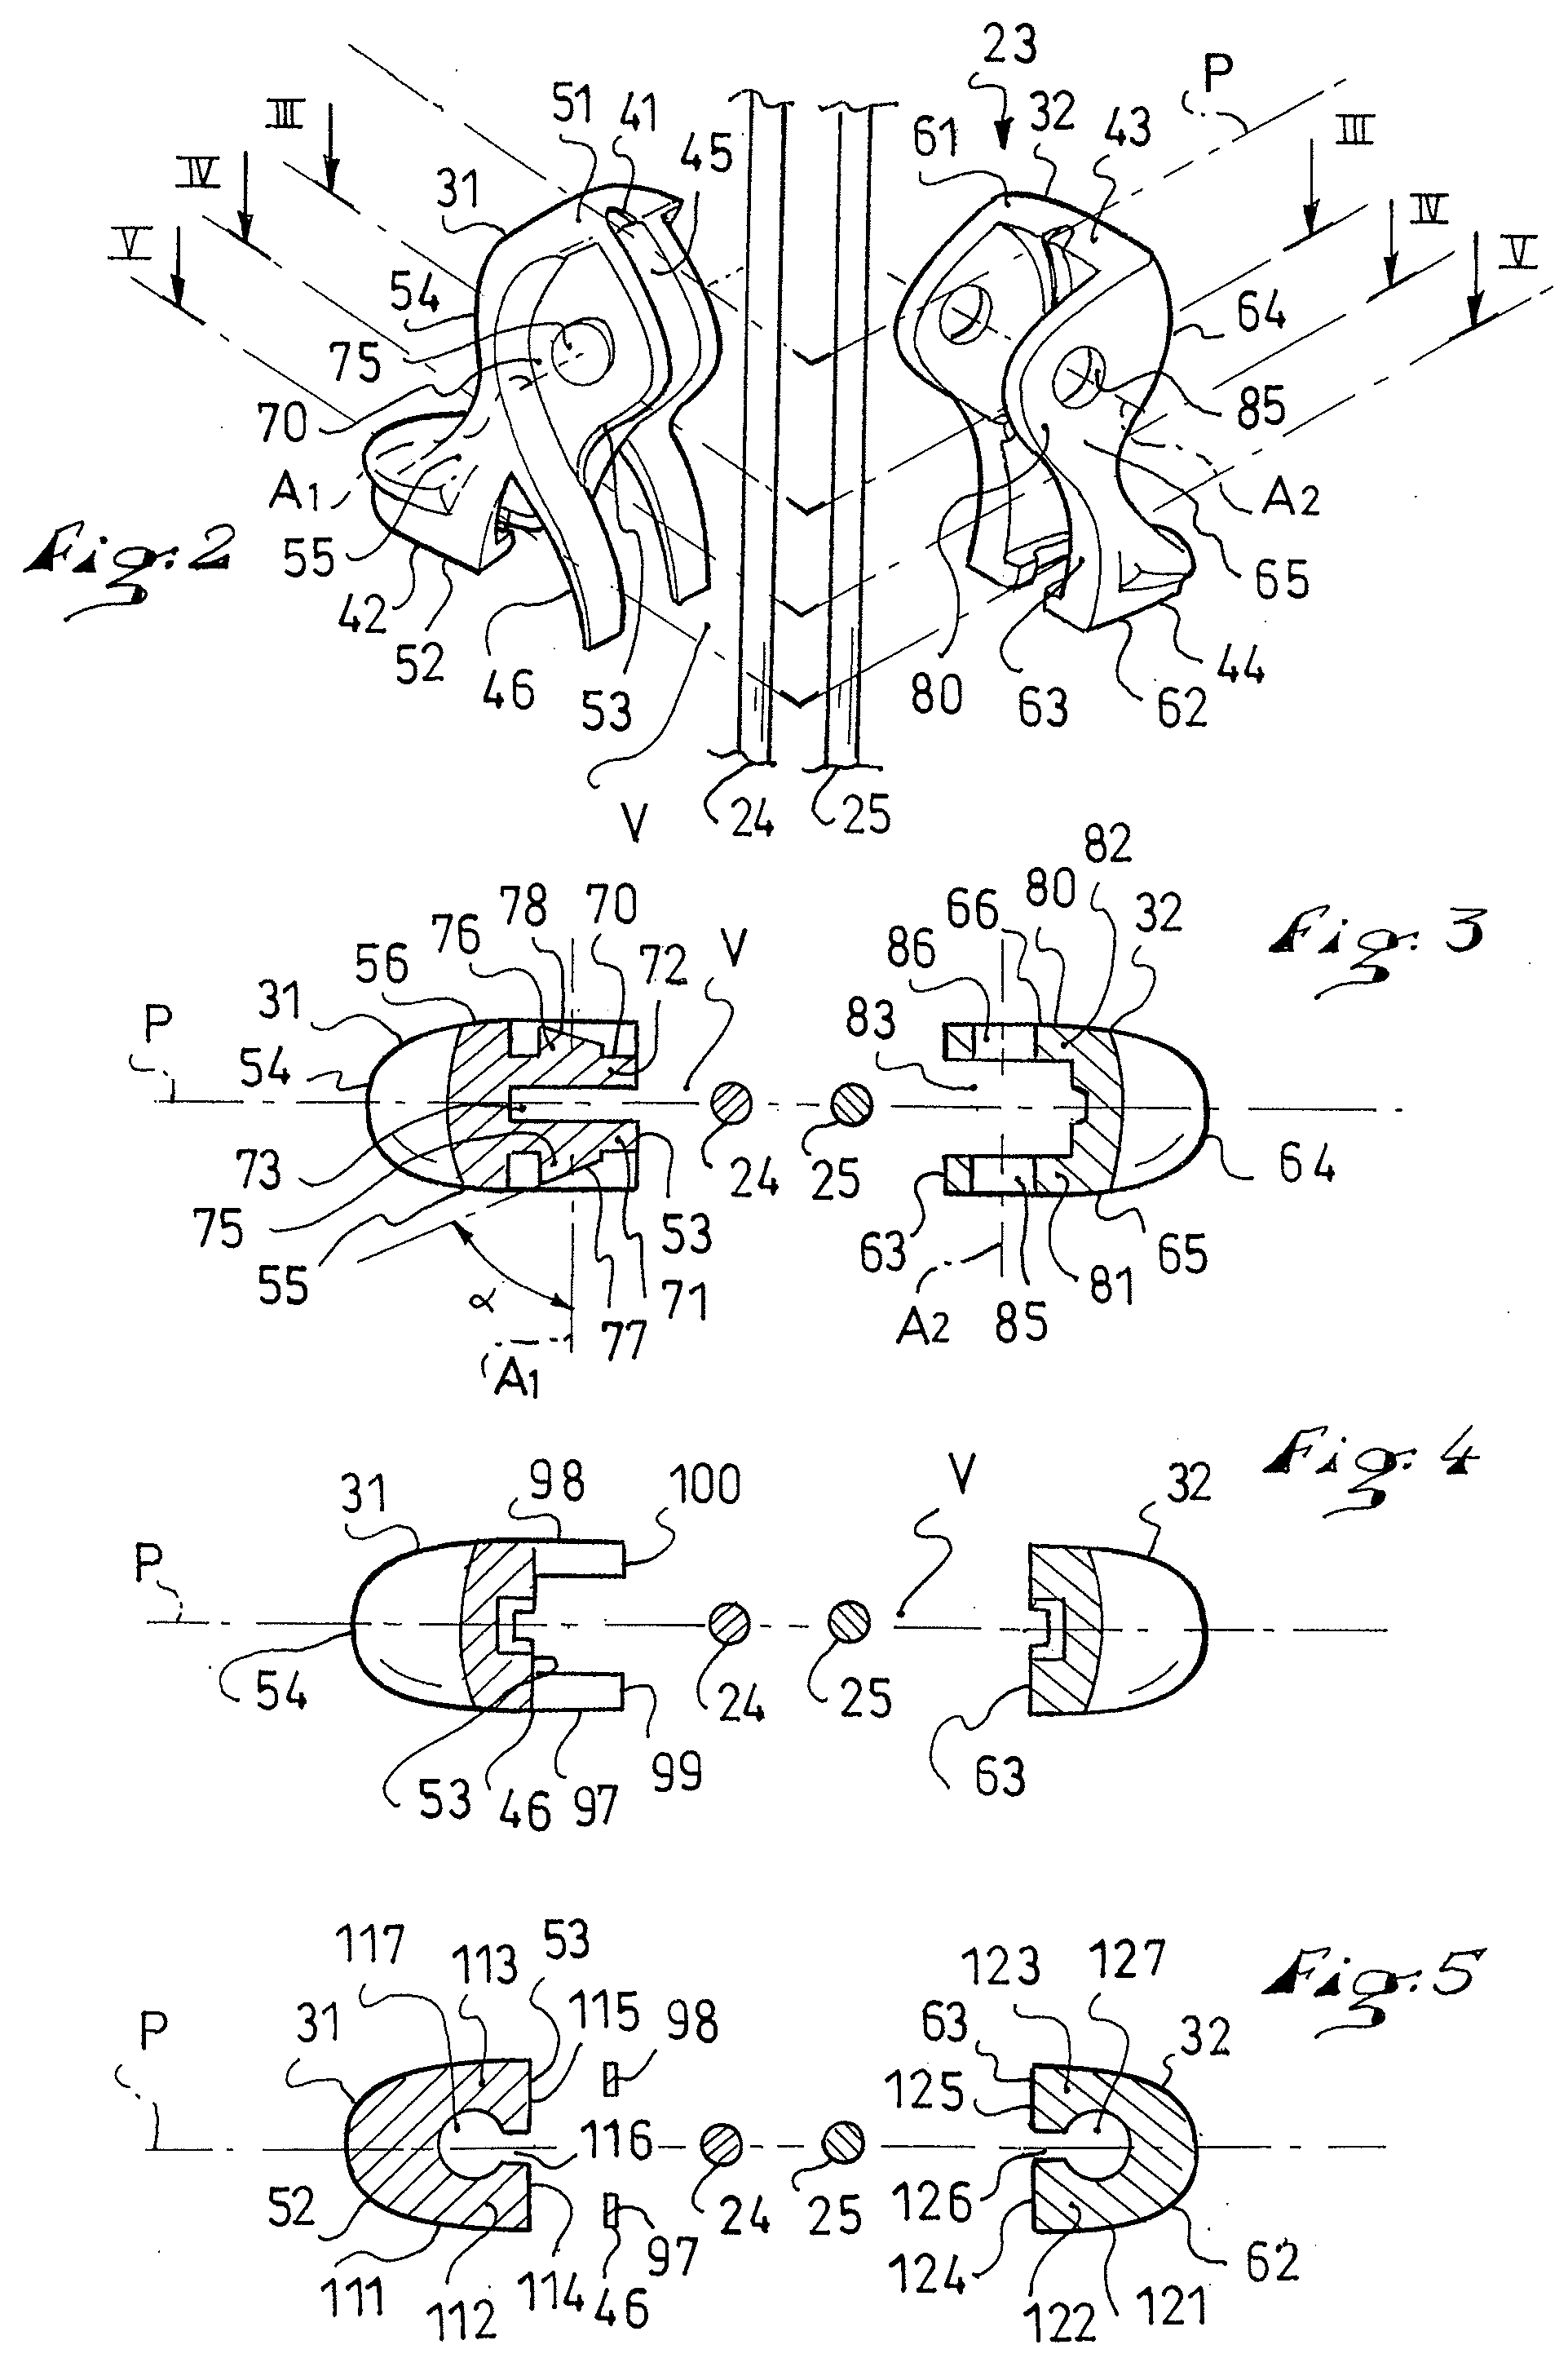 Device for locking flexible strands